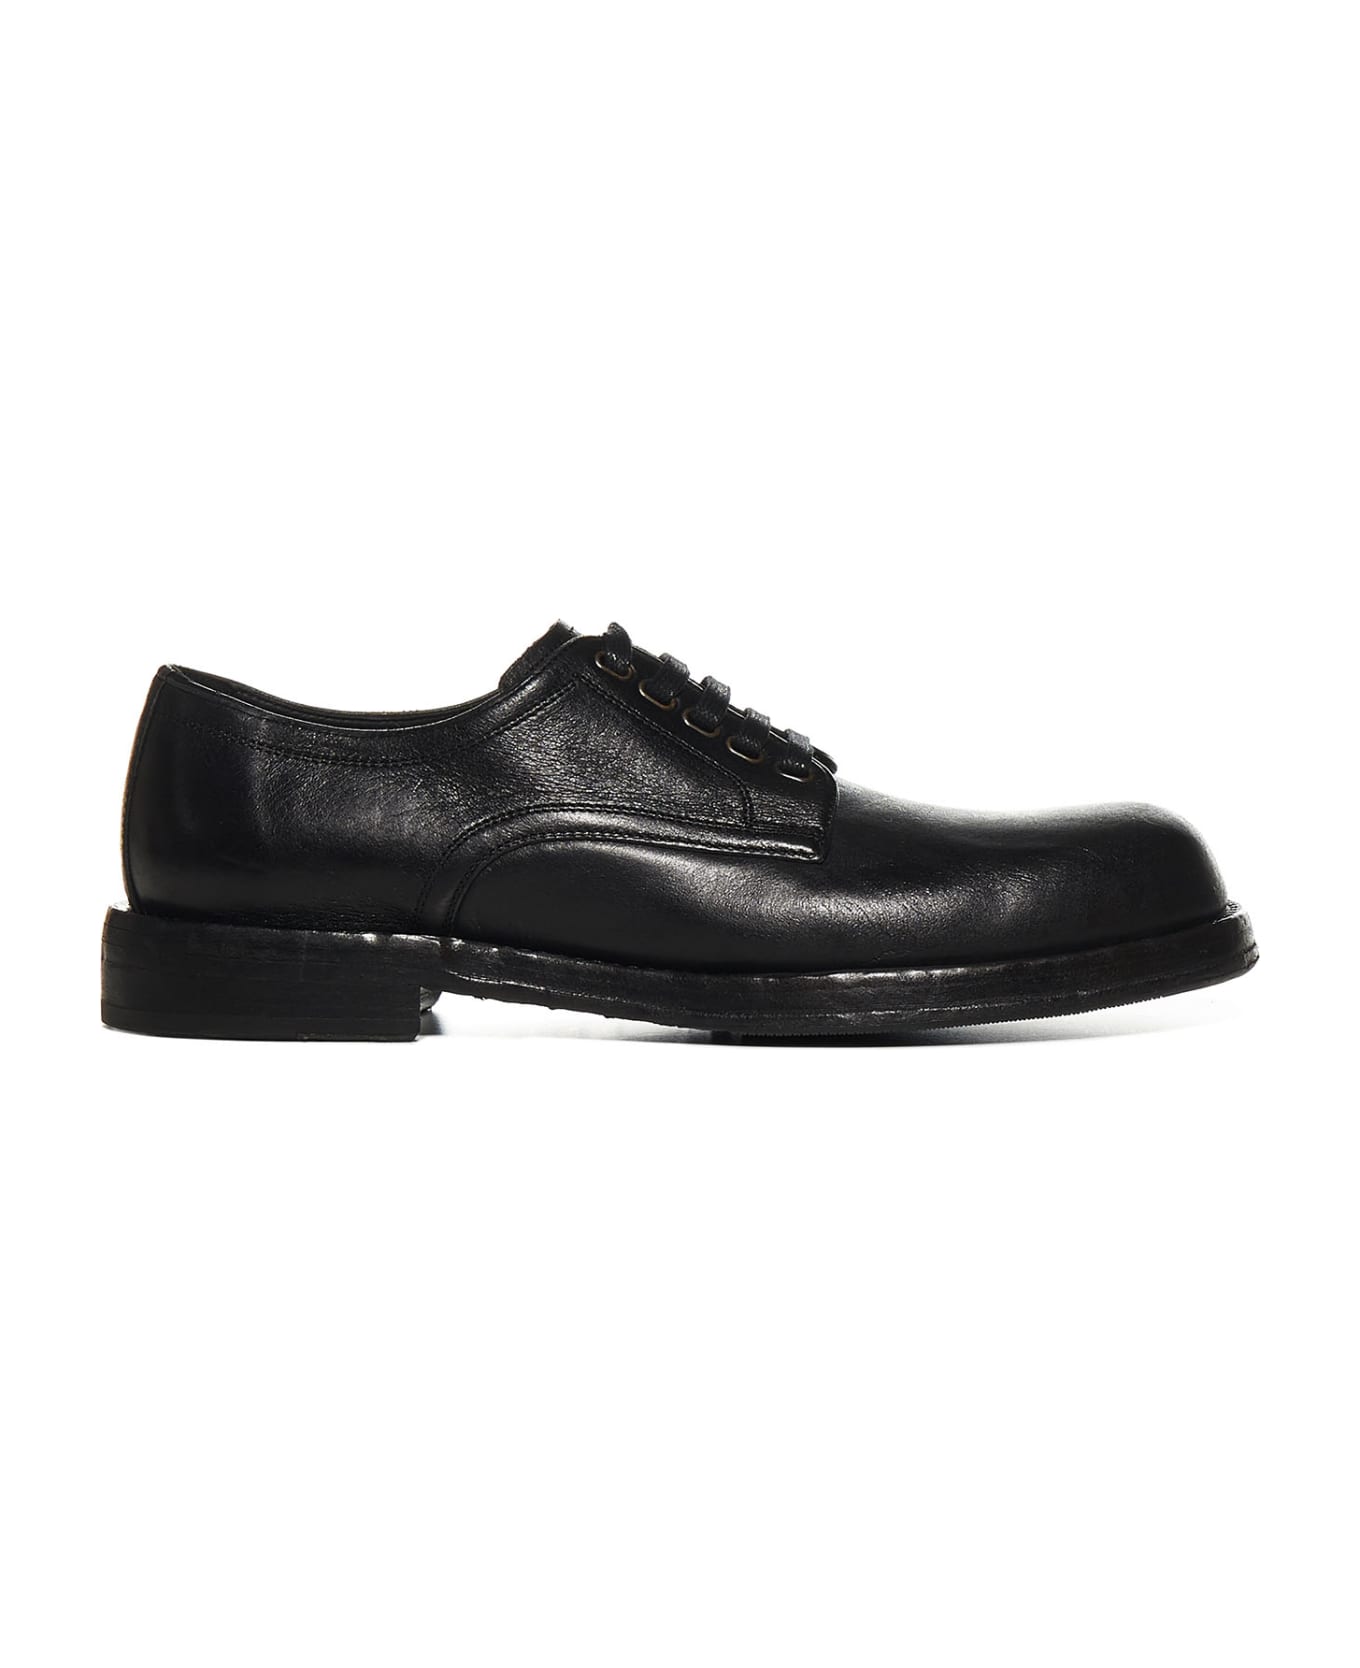 Dolce & Gabbana Laced Shoes - Nero